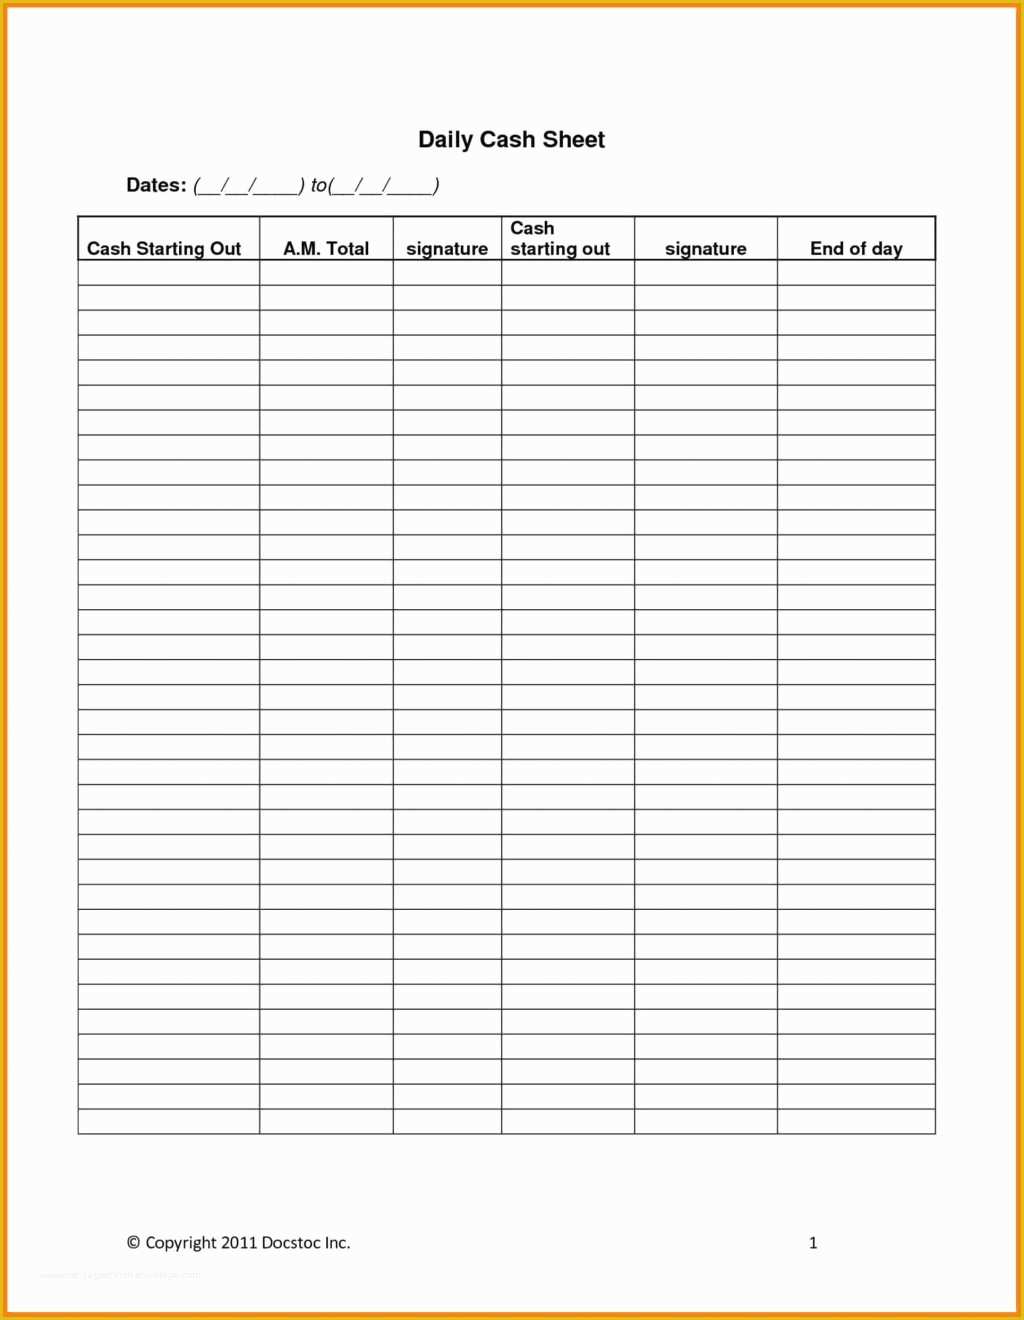 Cash Sheet Template Free Of Cash Sheet Template Free Personal Flow Excel forecast Up